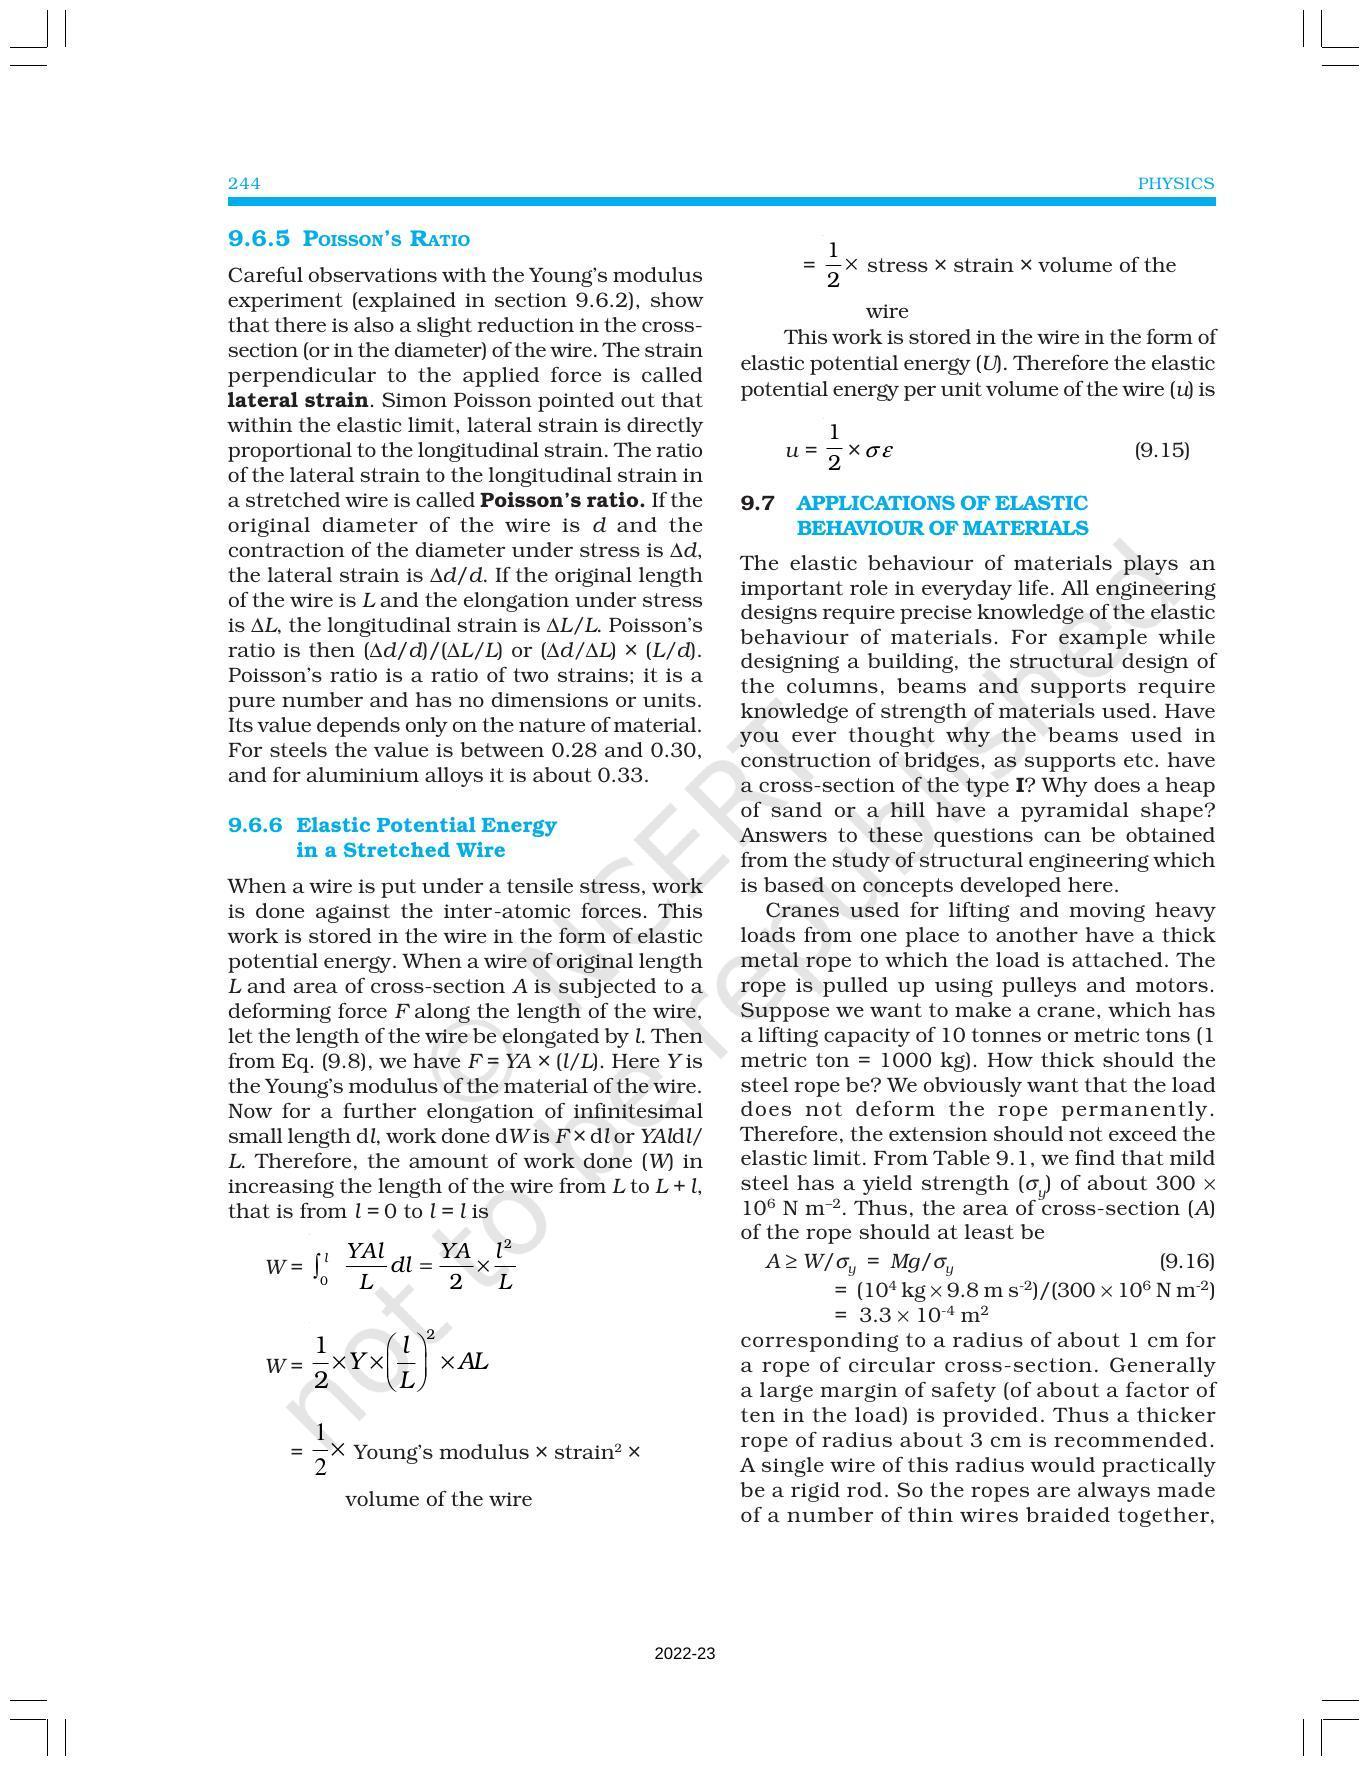 NCERT Book for Class 11 Physics Chapter 9 Mechanical Properties of Solids - Page 10